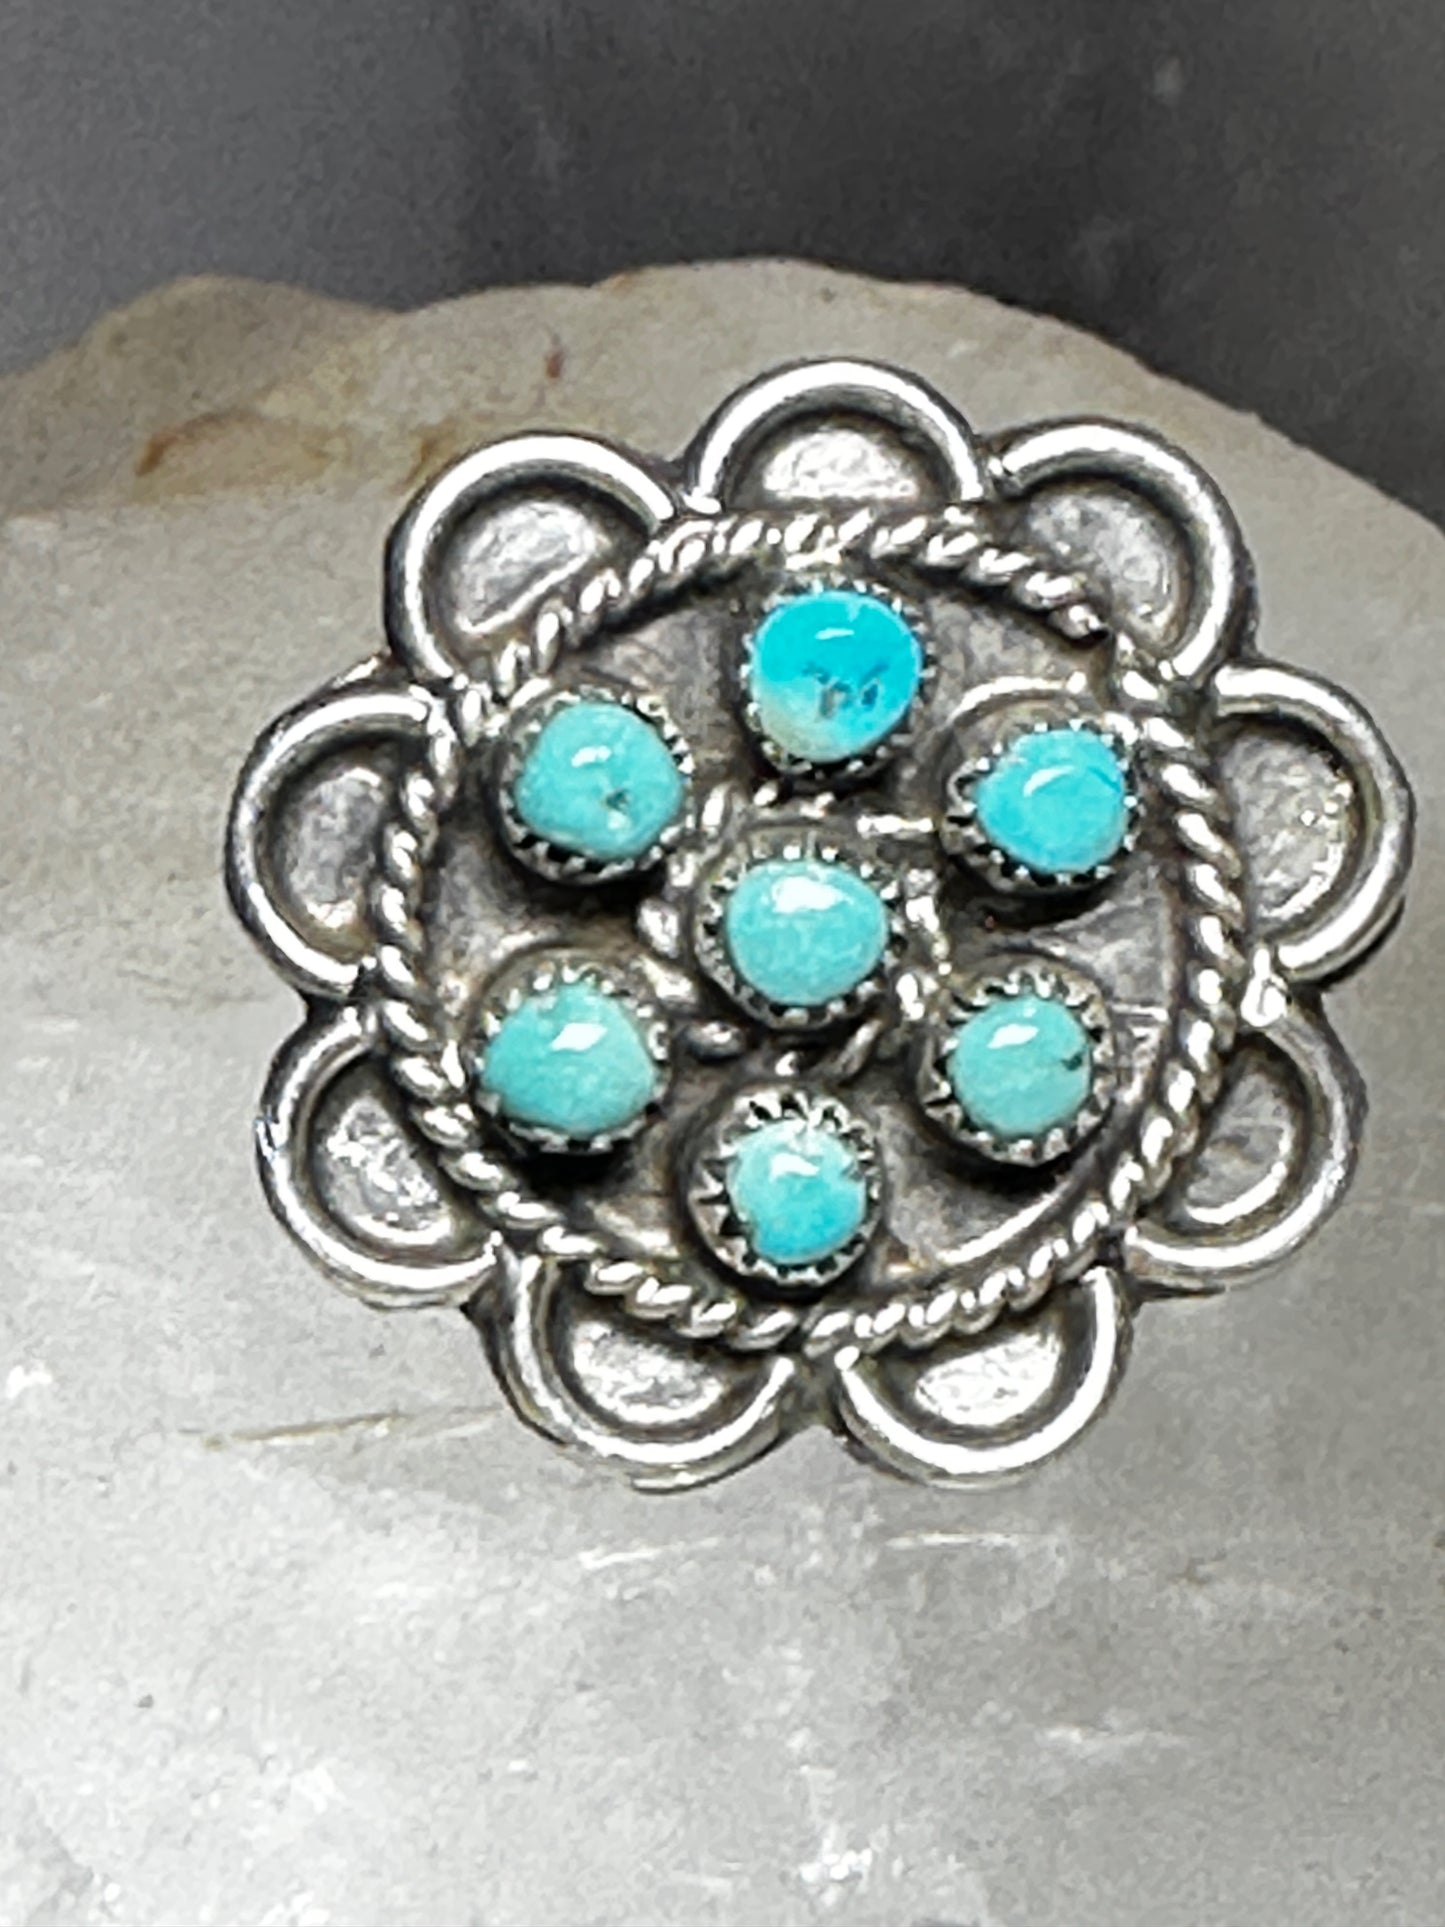 Zuni ring Turquoise size 8 petite point southwestern sterling silver women